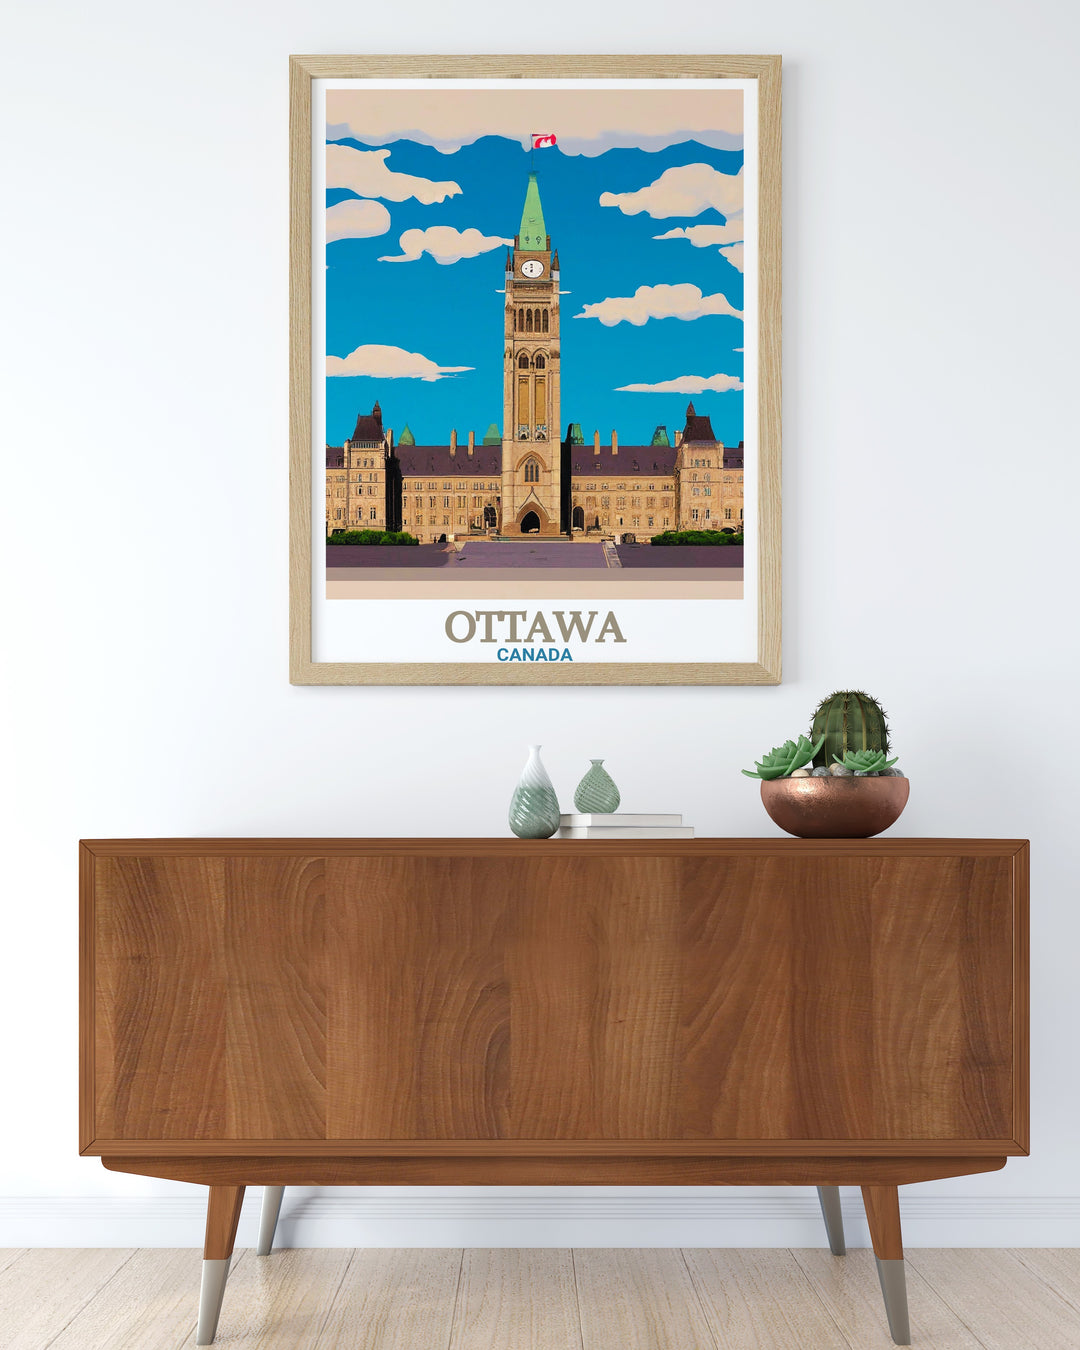 Ottawa Wall Art featuring Parliament Hill and other city landmarks. Perfect for those who love Ottawa travel this artwork offers a captivating view of the citys most famous sites bringing Ottawas charm into your living space.